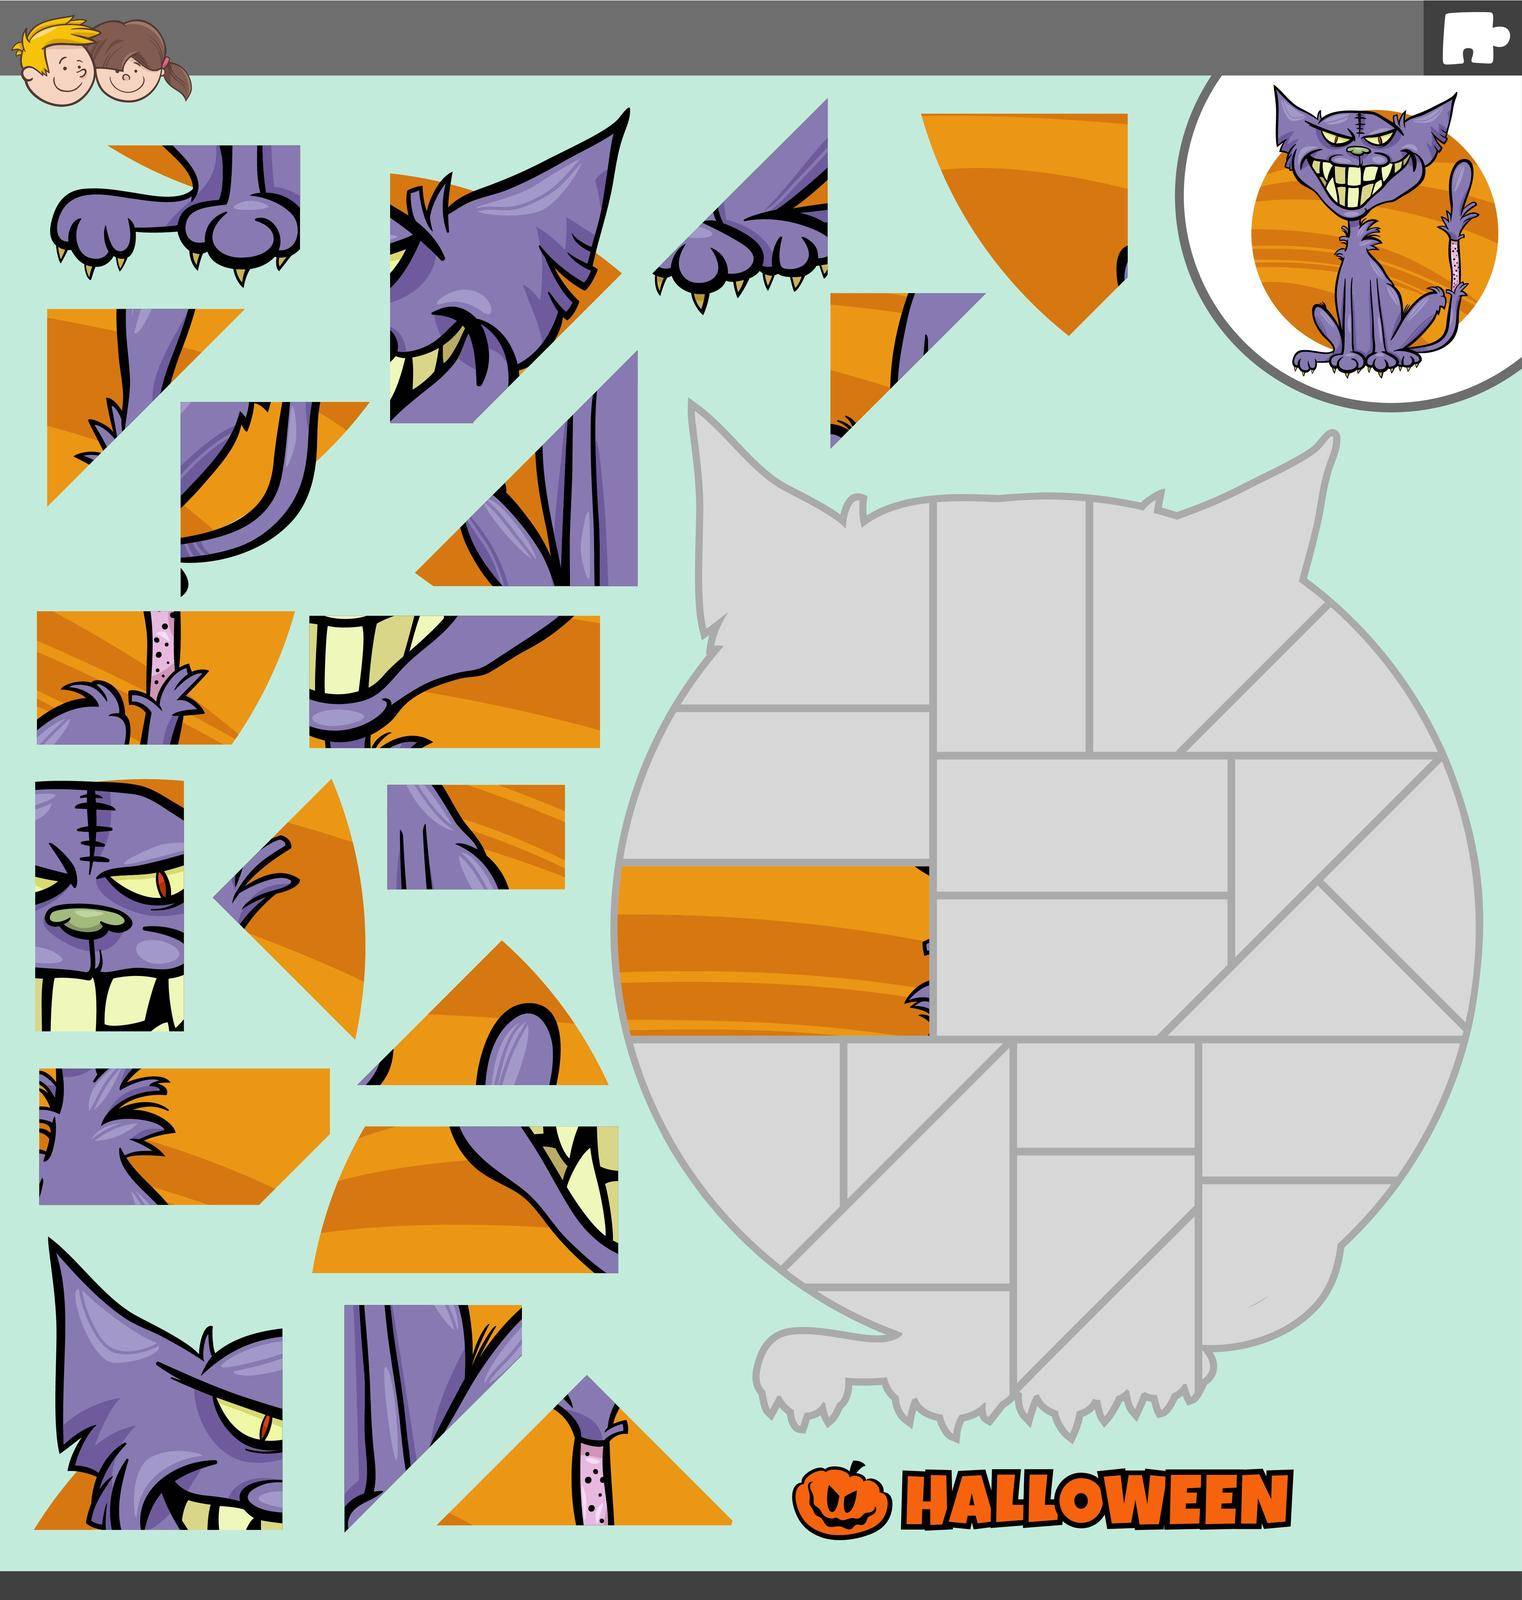 Cartoon illustration of educational jigsaw puzzle game for children with zombie cat character on Halloween time